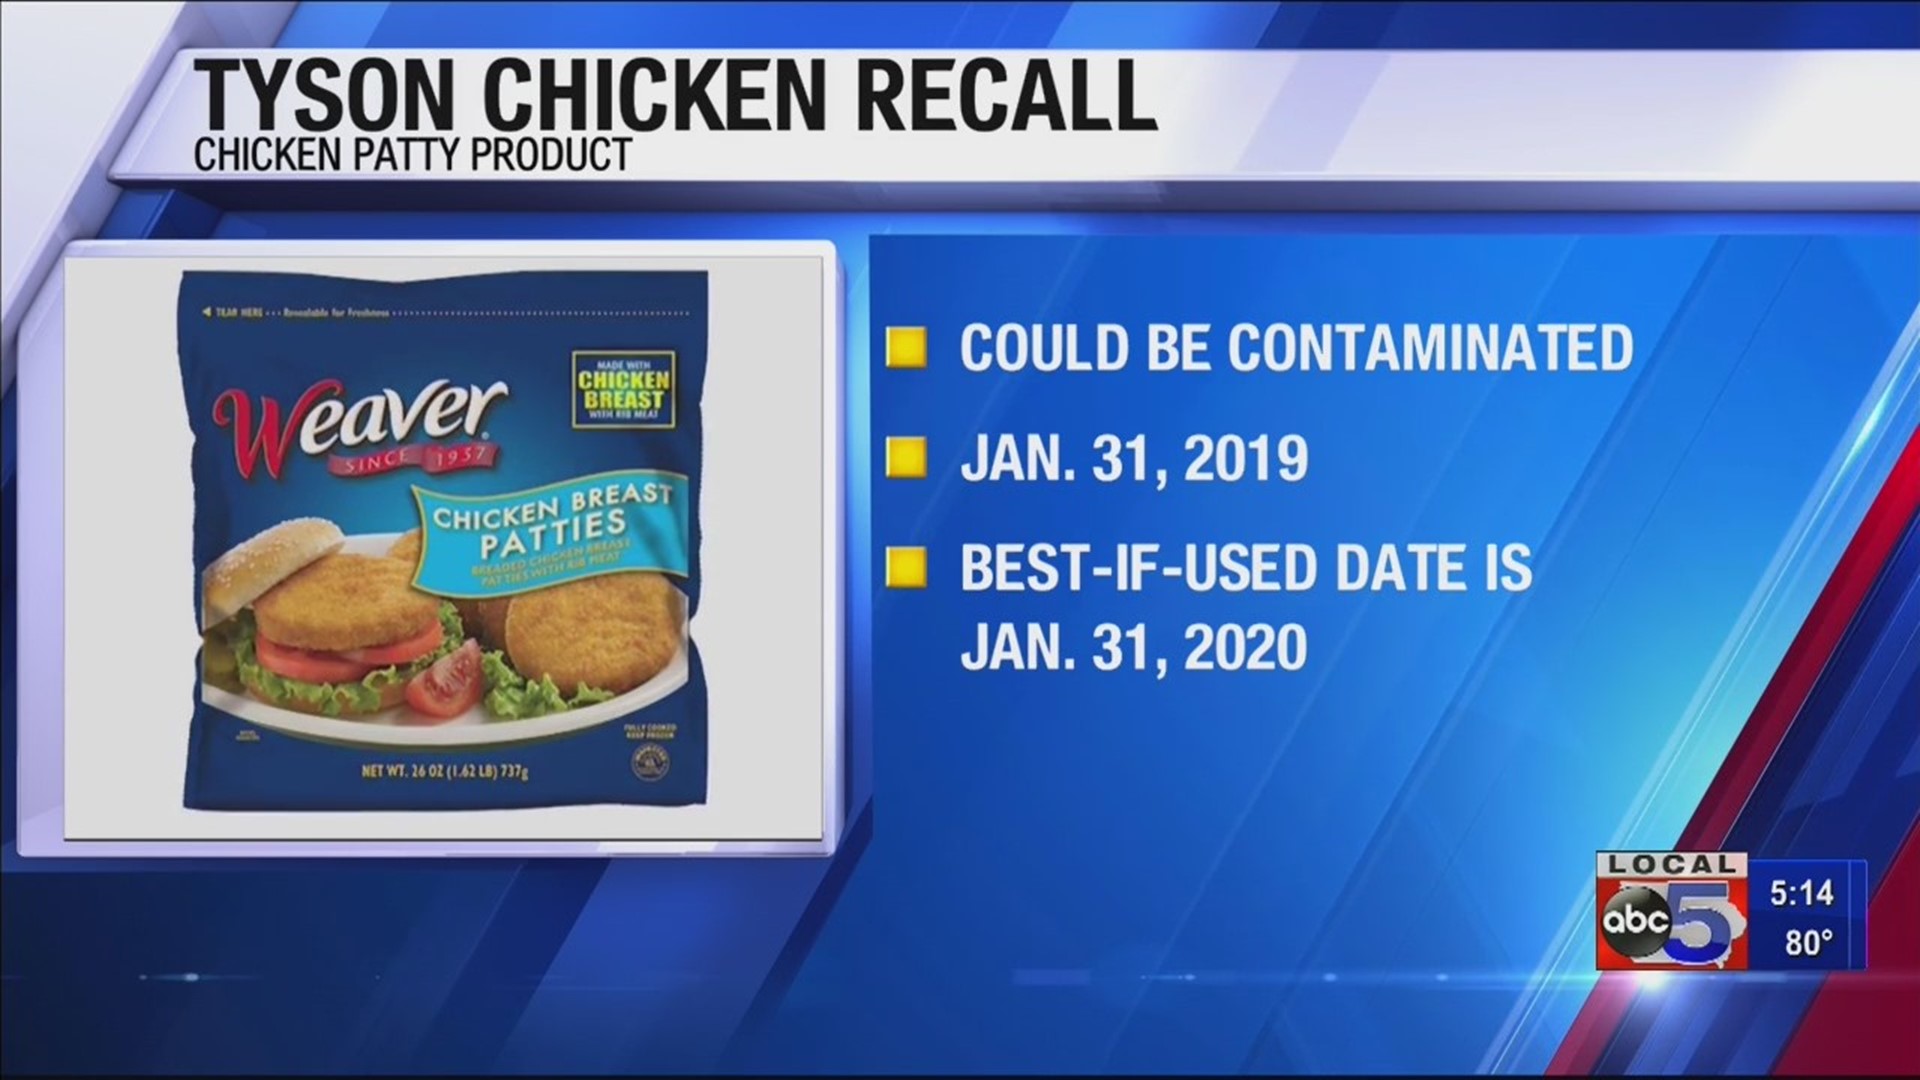 The United States Department of Agriculture says more than 39,000 pounds of the company's Weaver brand frozen chicken patty product is under the recall. The fully-cooked chicken could be contaminated with extraneous materials.